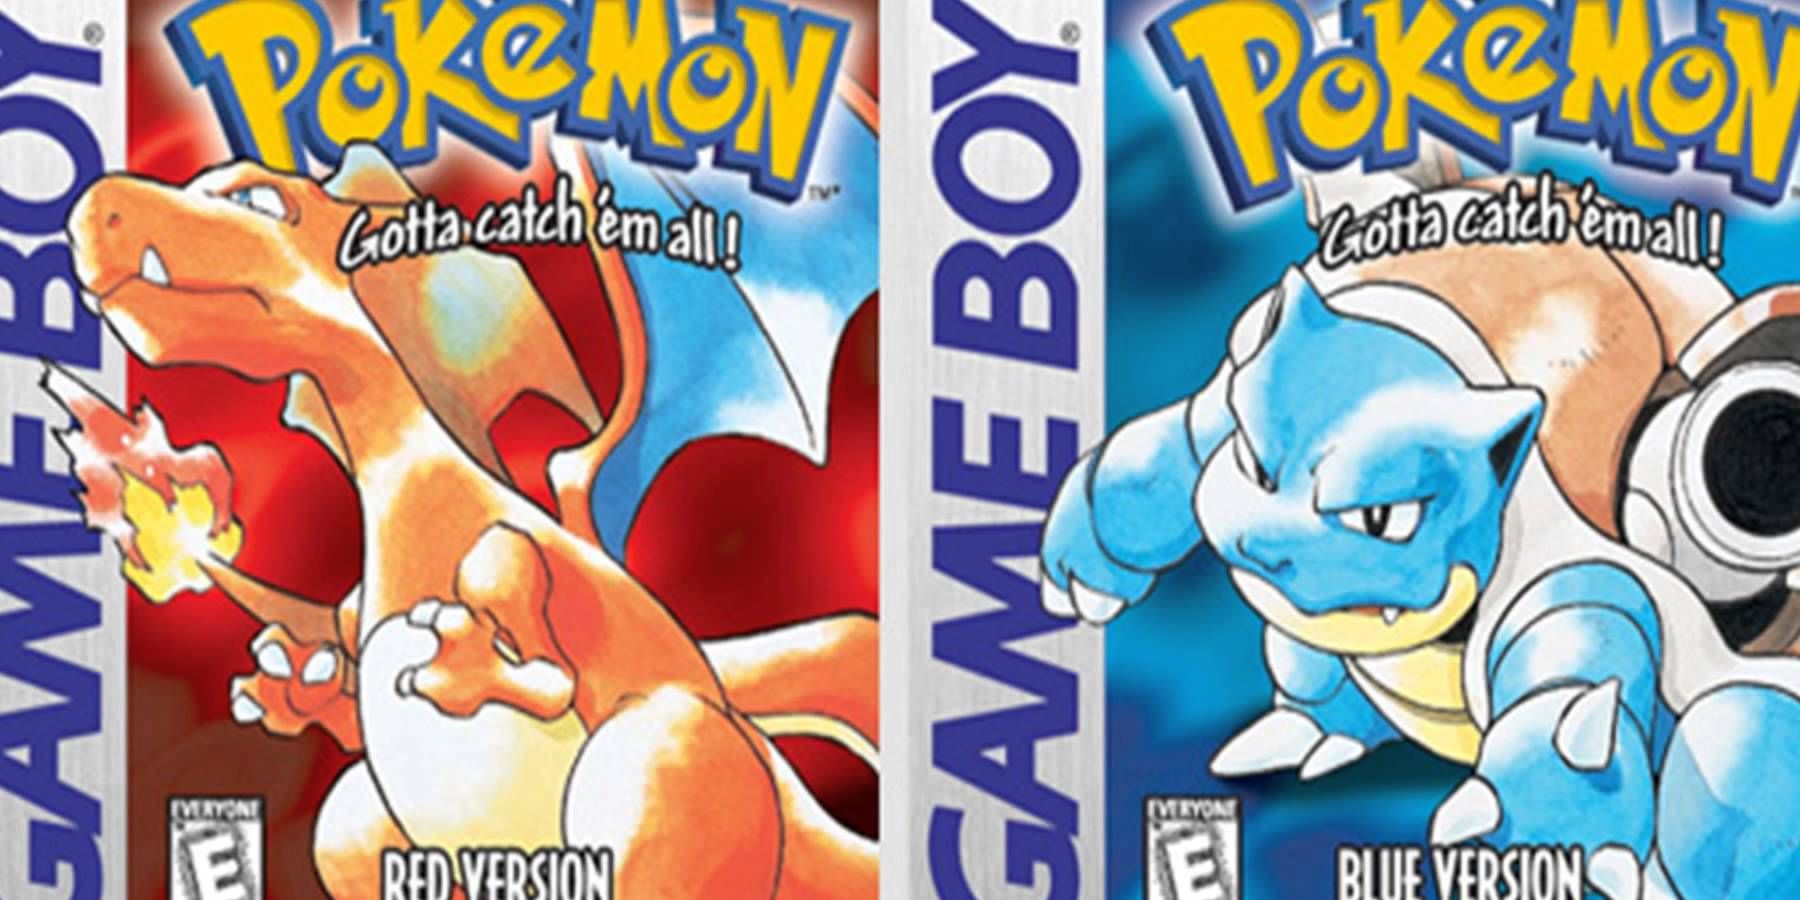 The cover art of Pokemon Red and Blue for the Nintendo Game Boy